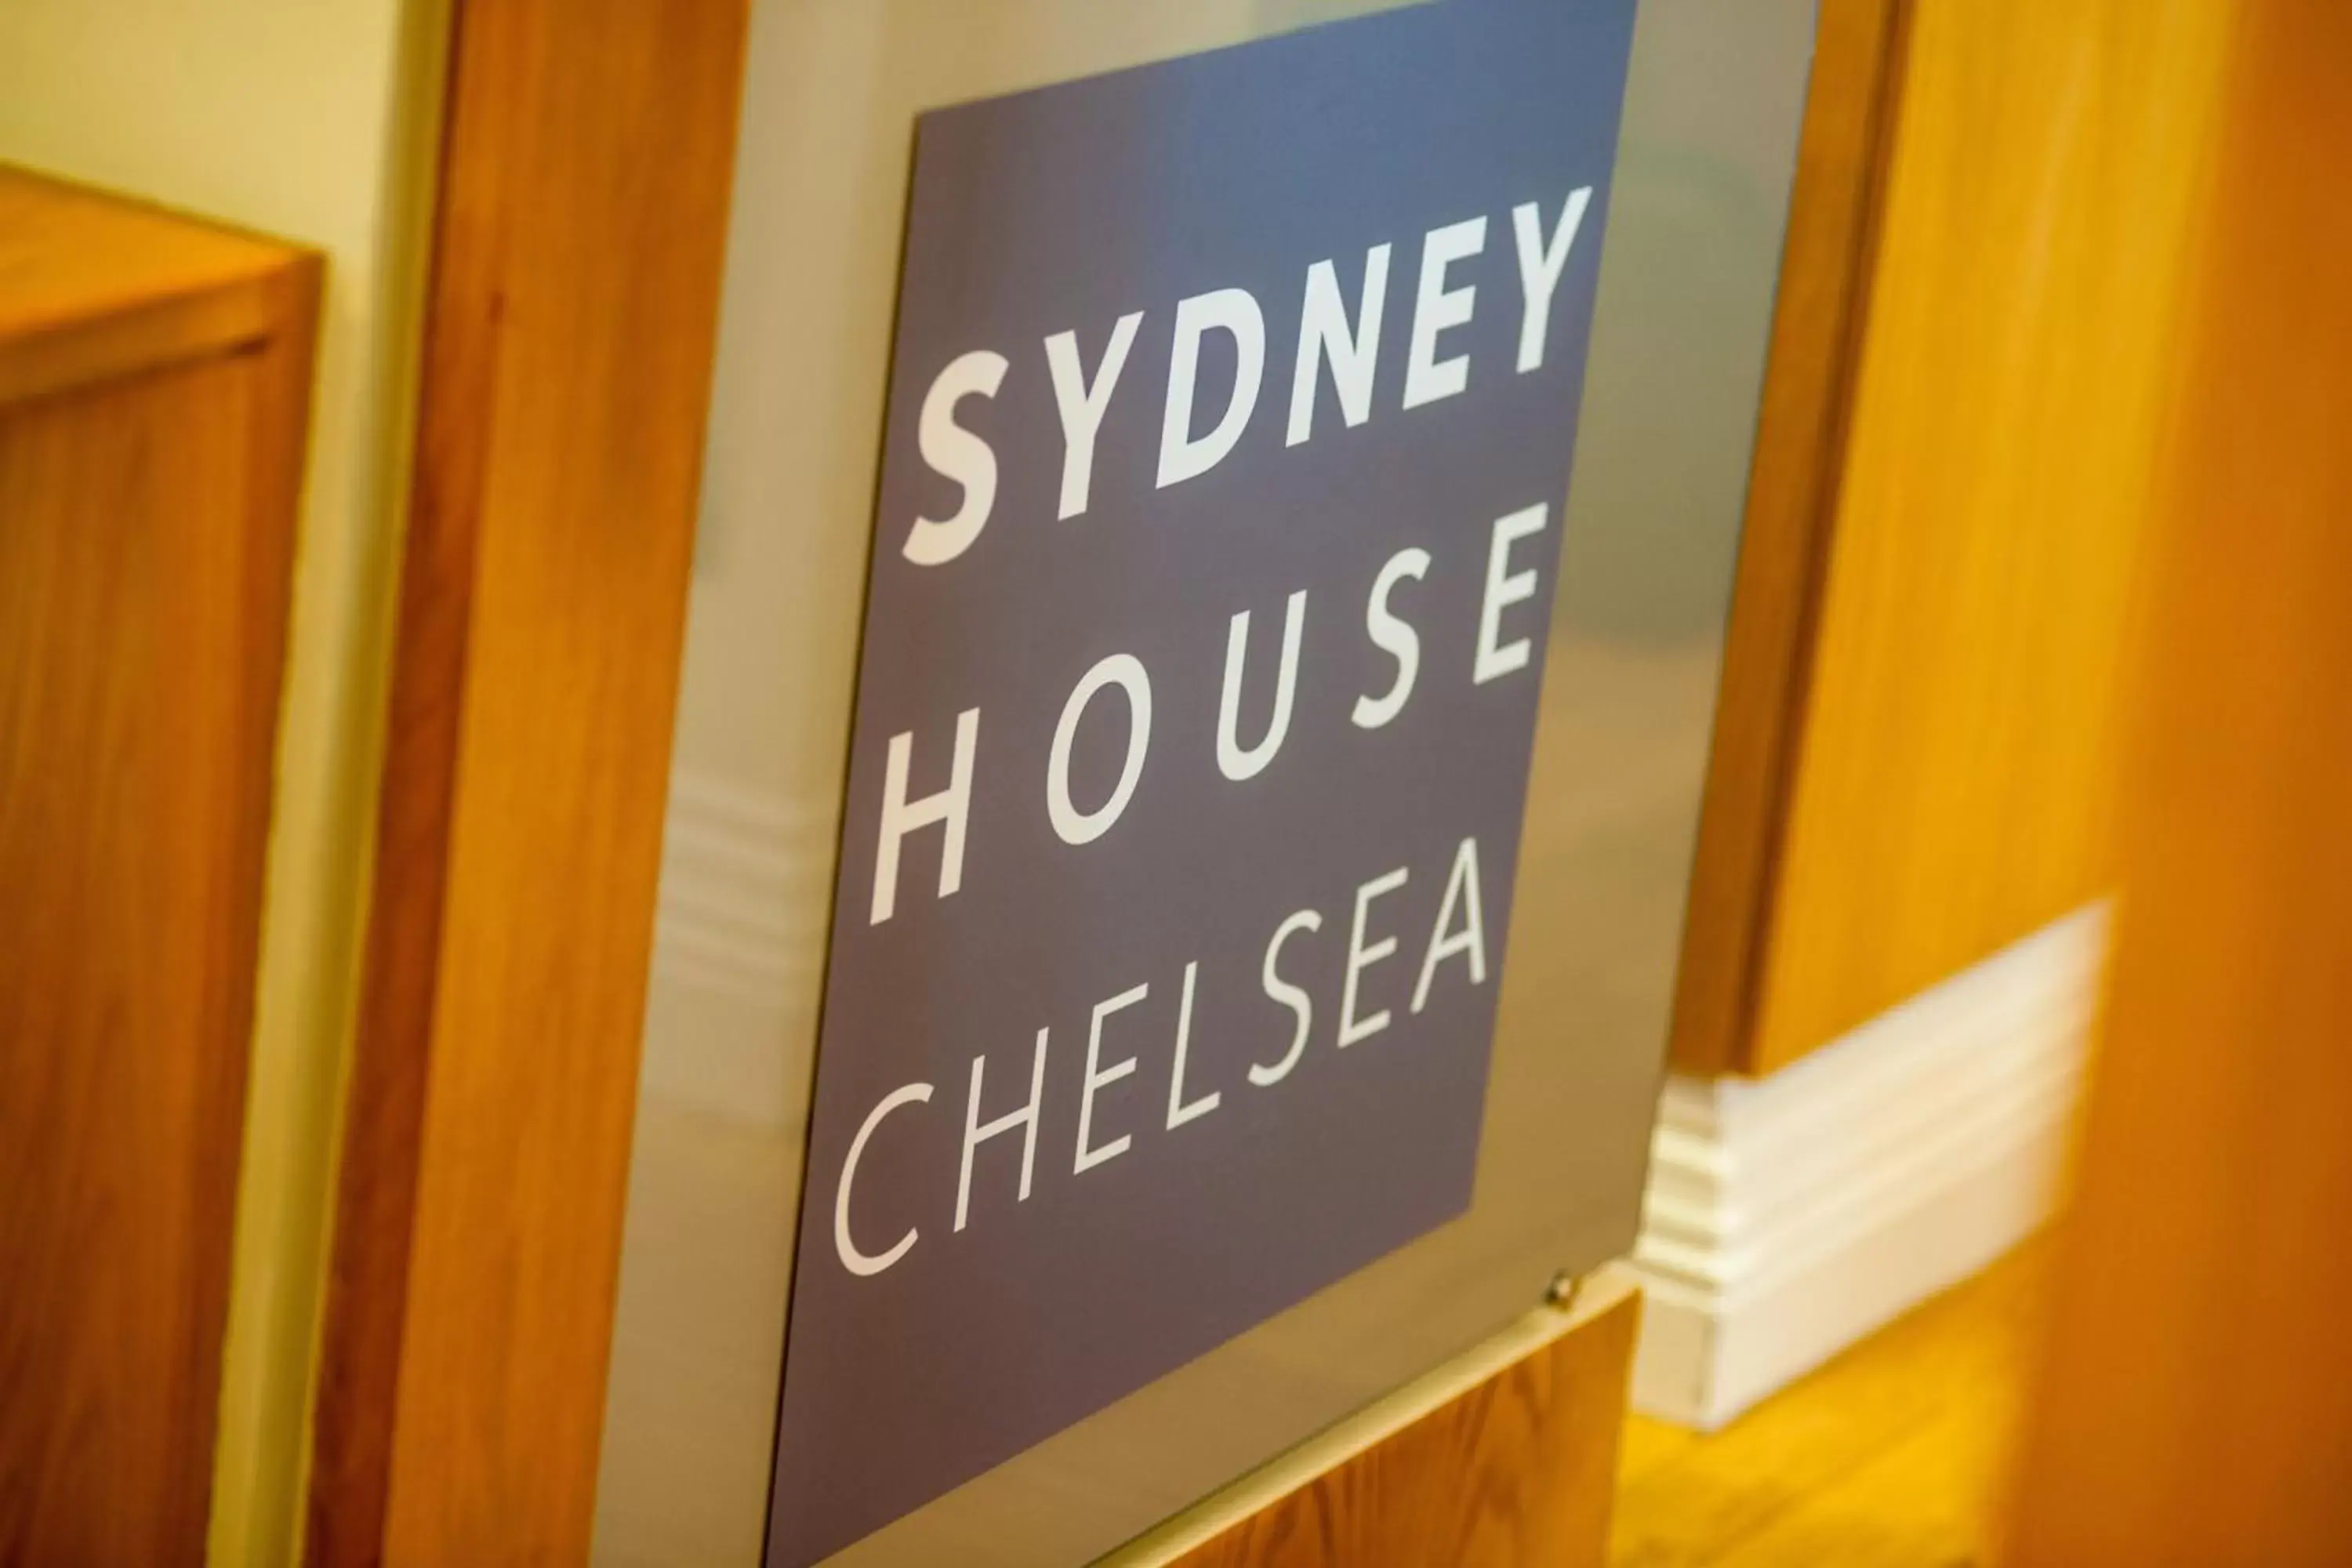 Property logo or sign in Sydney House Chelsea